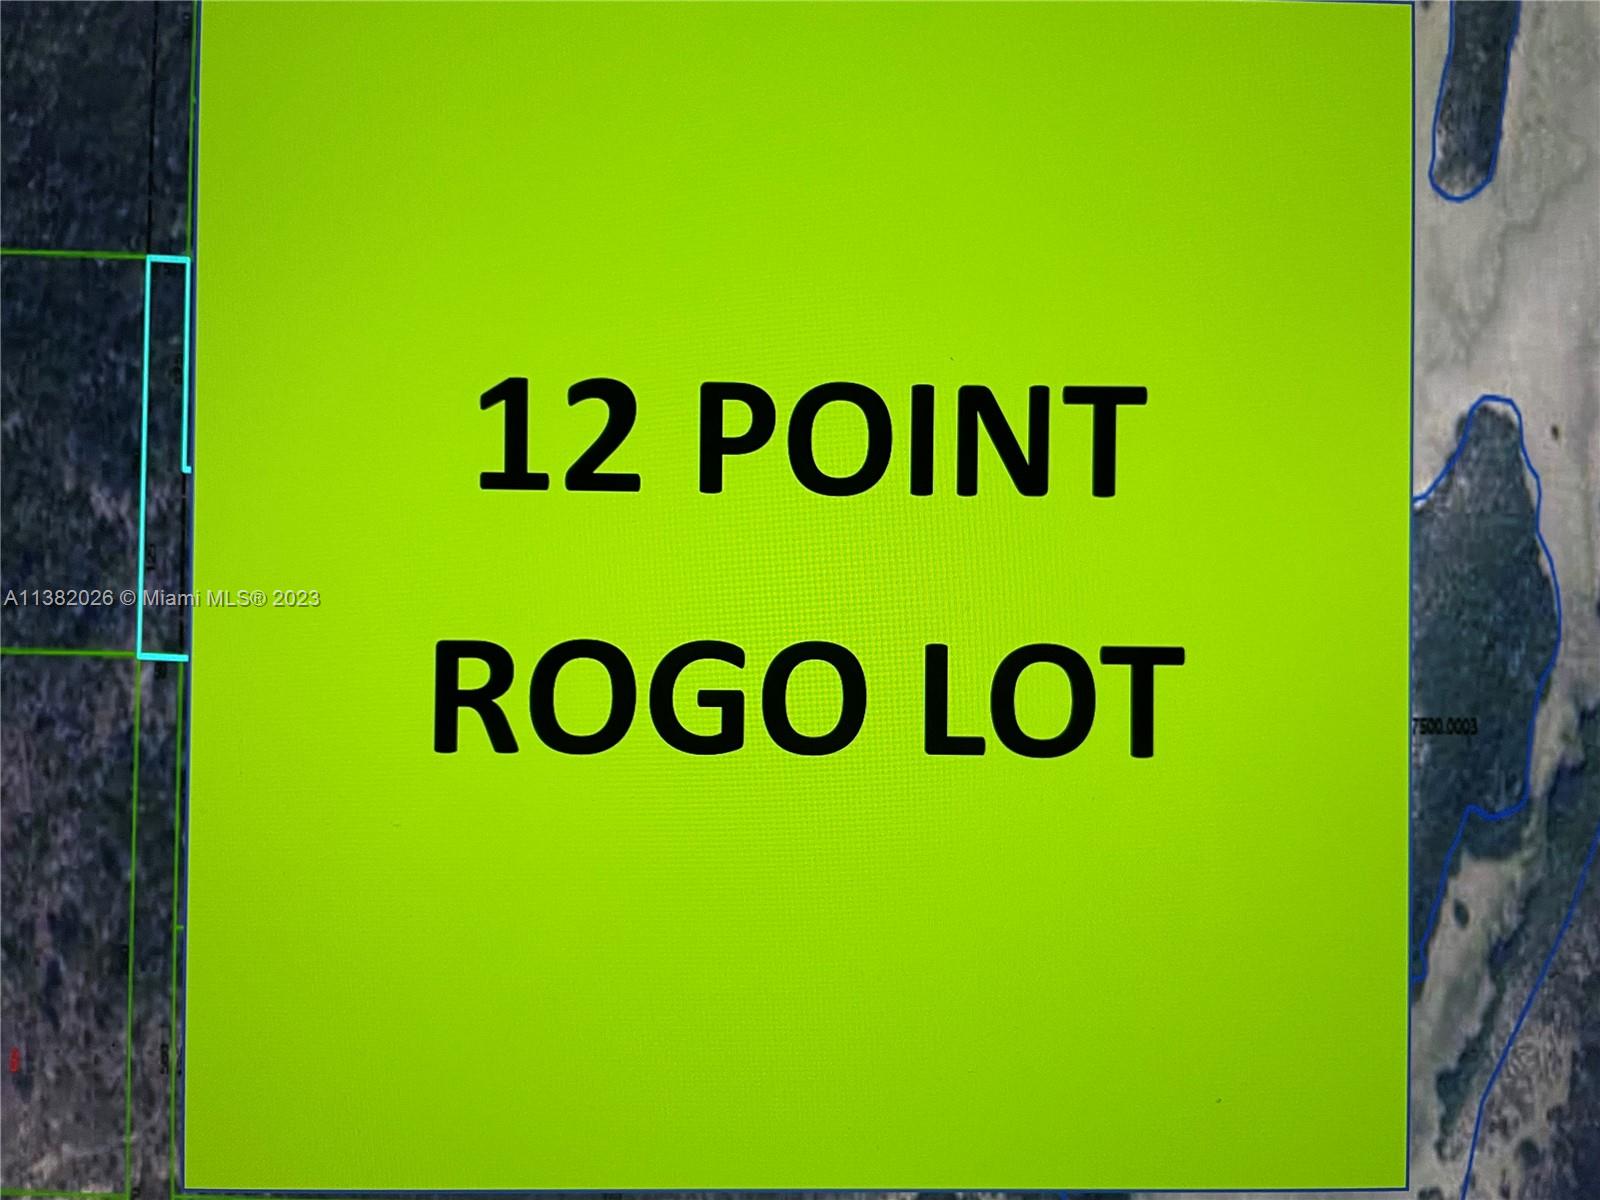 12 POINT ROGO LOT LETTER FROM COUNTY IN HAND. BUYER TO VERIFIY WITH COUNTY. SOLD AS-IS AND BELIEVED TO BE UNABLE TO DEVELOP. BUYER TO CONFIRM ALL INFORMATION. BETTER HURRY TO MAKE IT BY NEXT ROGO QUARTER AND CAN CLOSE QUICKLY! OWNER IS RELATED TO LISTING​​‌​​​​‌​​‌‌​‌‌‌​​‌‌​‌‌‌​​‌‌​‌‌‌ AGENT.